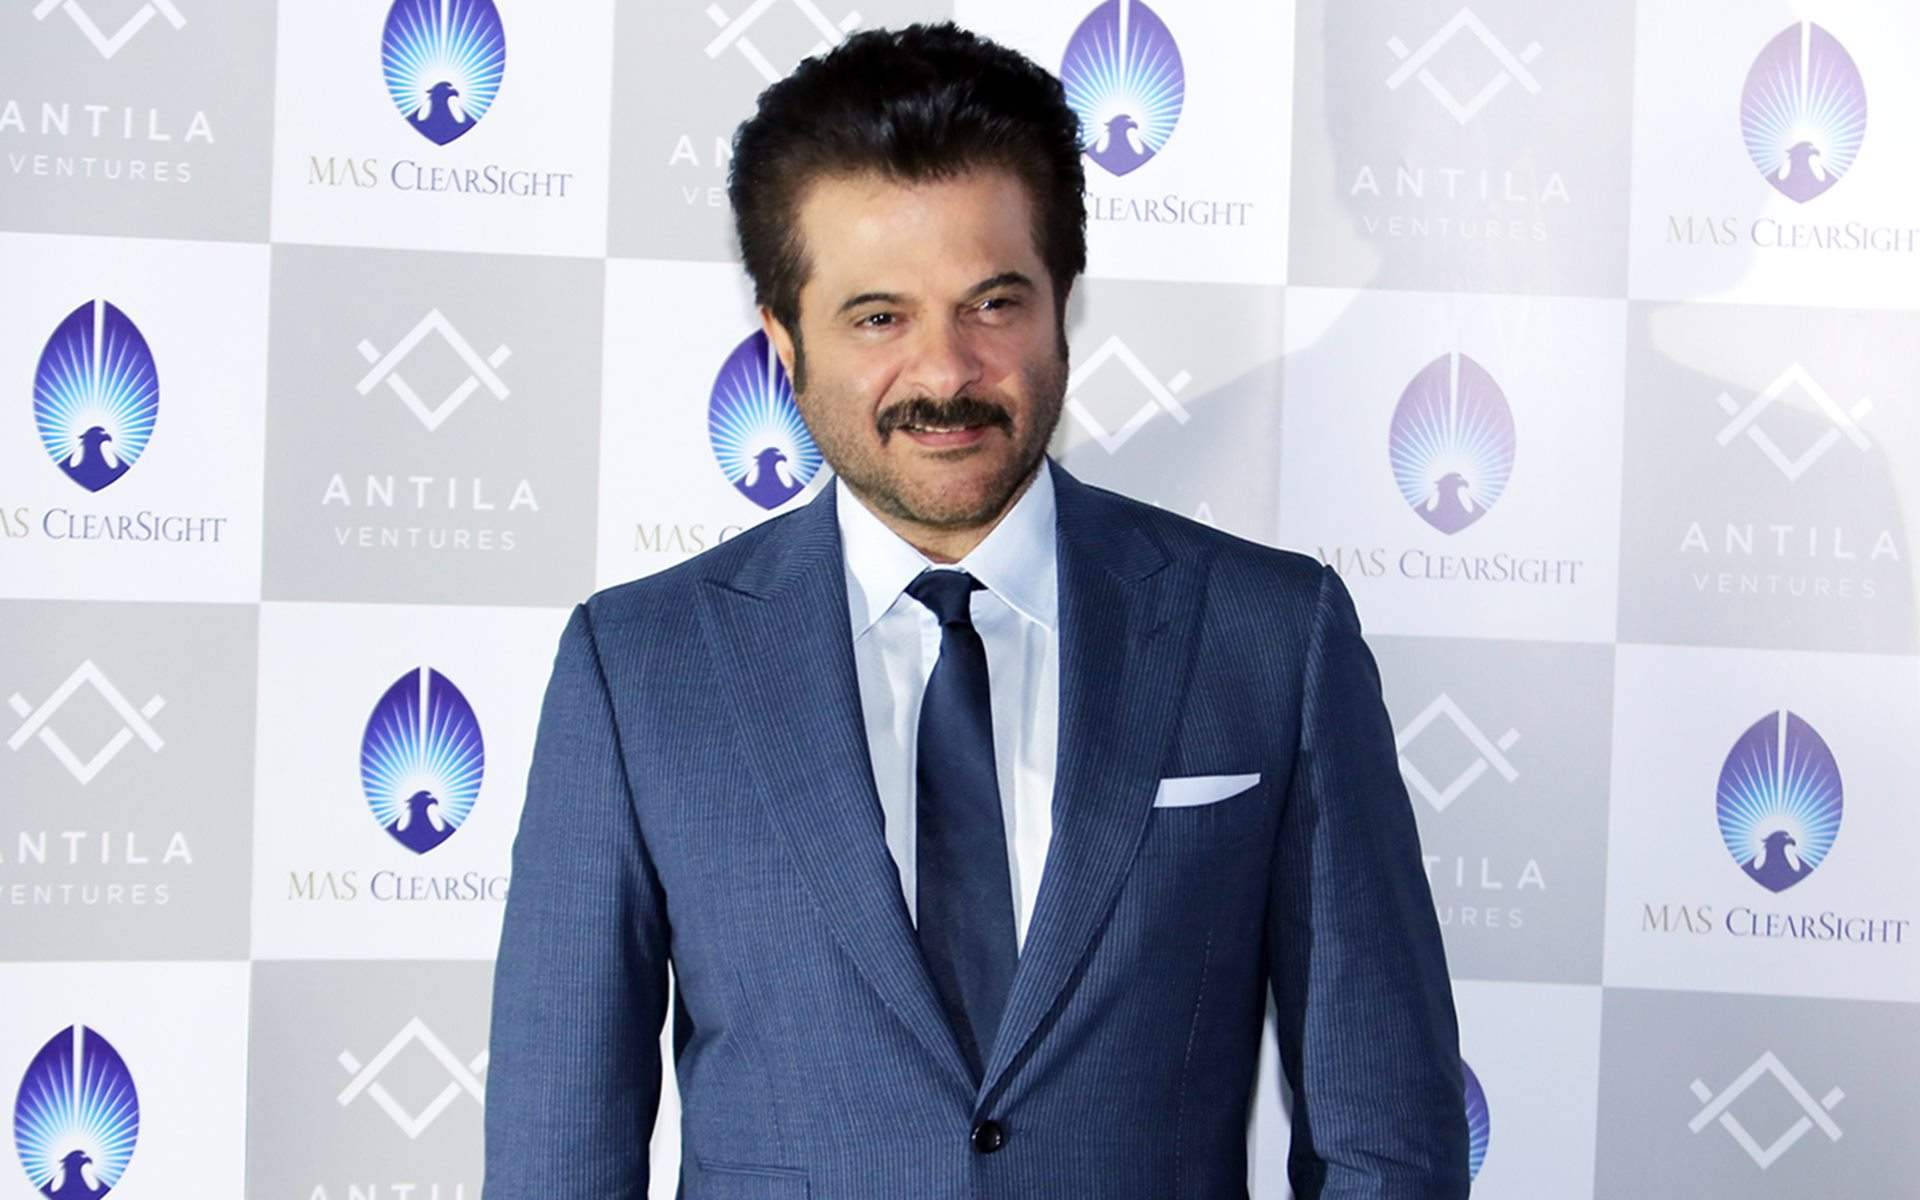 Anilkapoor Mas Clearsight Is Not A Complete Sentence And Has No Context That Could Be Related To Computer Or Mobile Wallpaper. Please Provide More Information So That I Can Accurately Translate The Text. Wallpaper